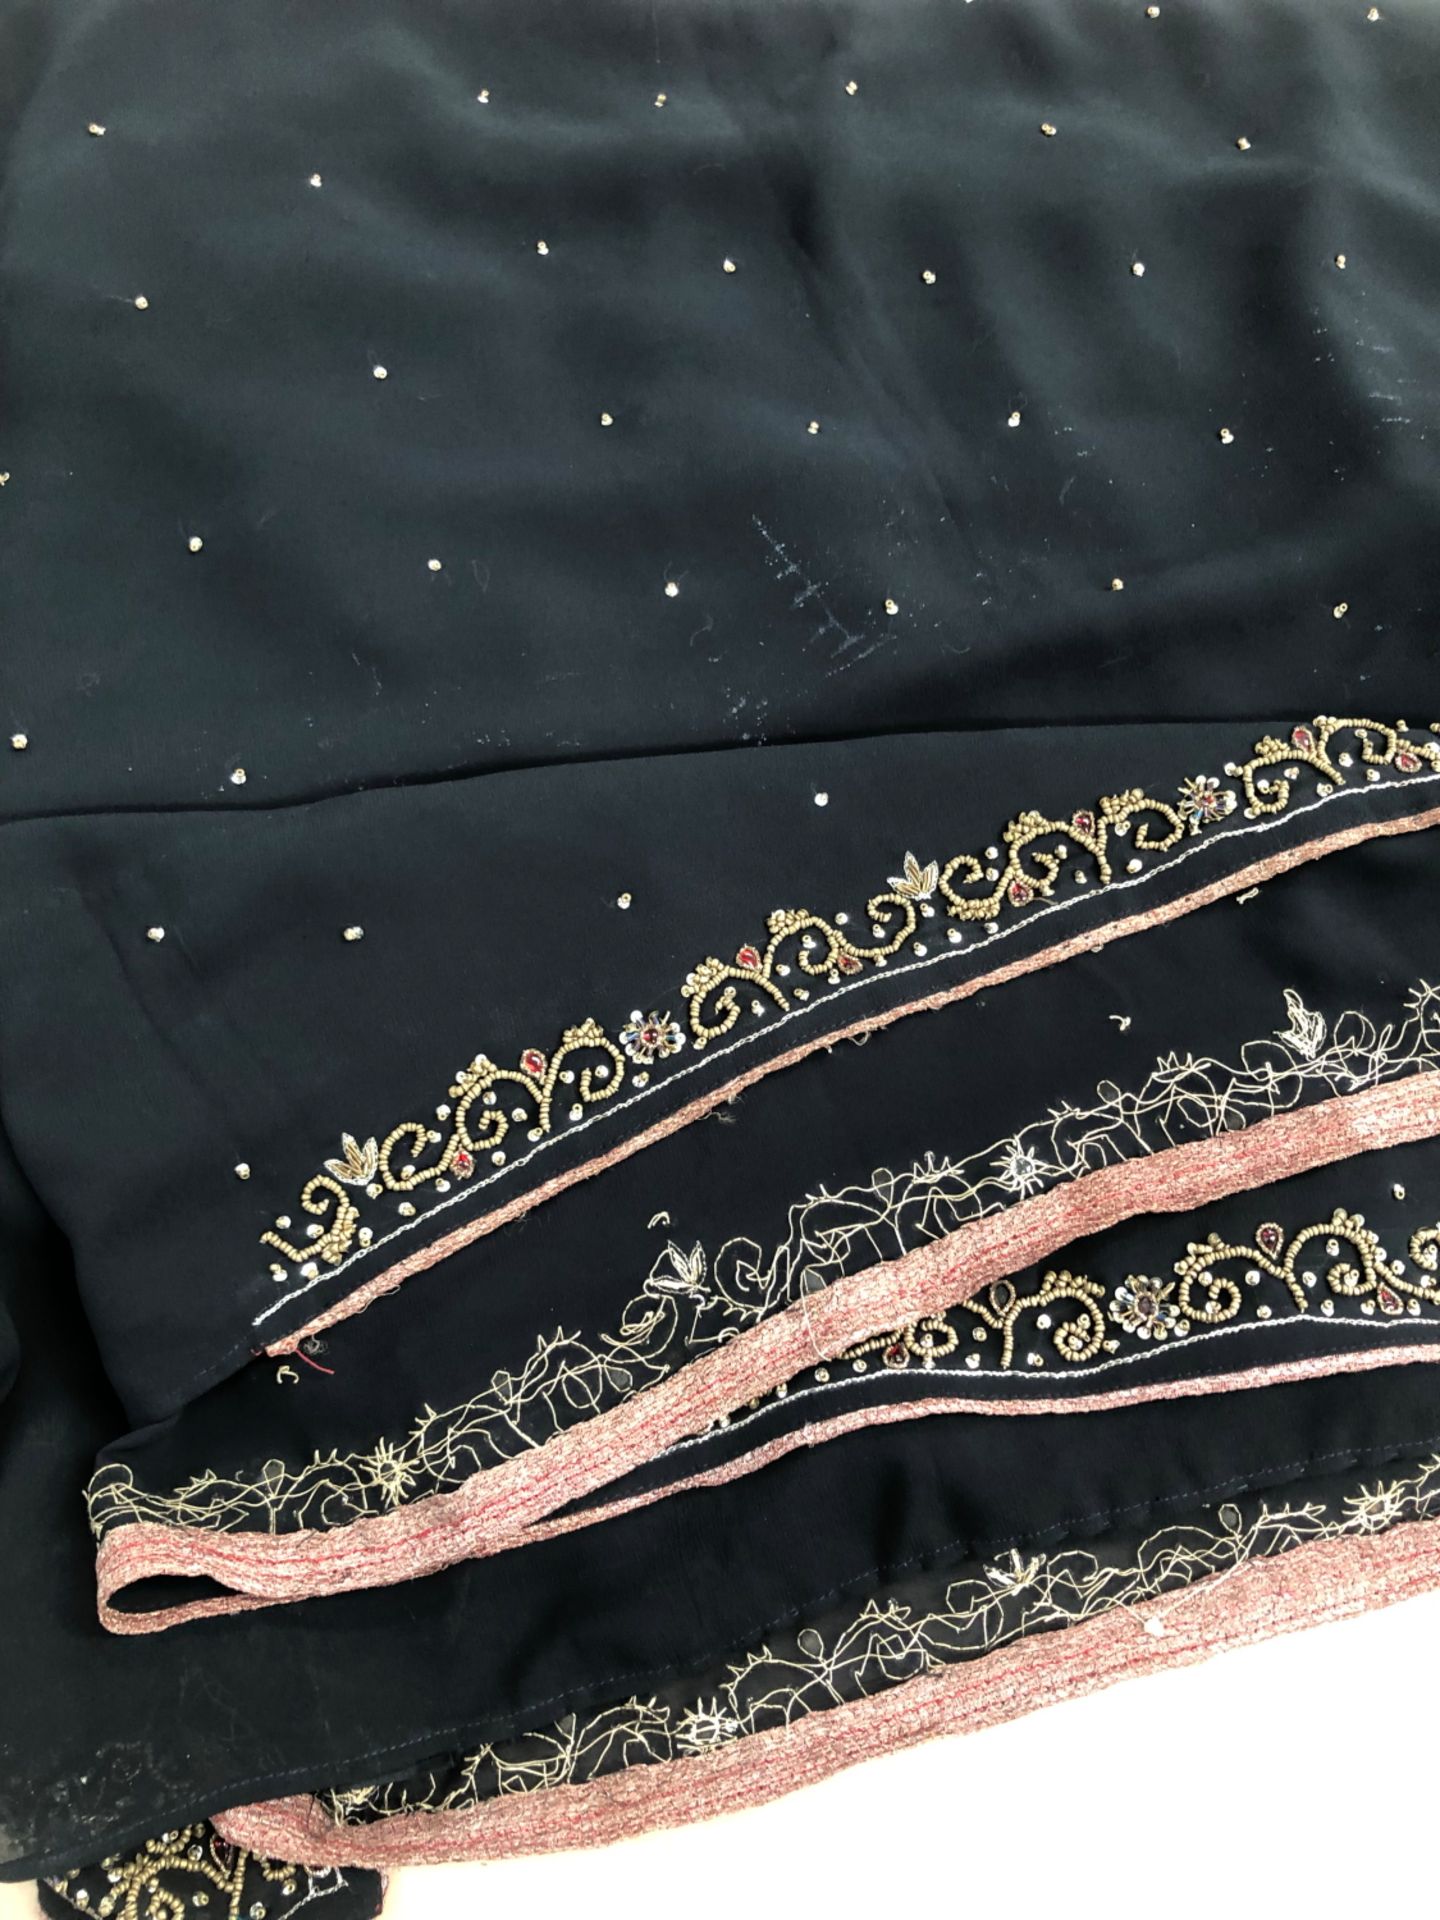 A BLACK CREPE SARI WITH BEAD WORK AND SEQUIN DECORATION, A PINK SARI WITH SILVER THREAD WORK - Image 5 of 5